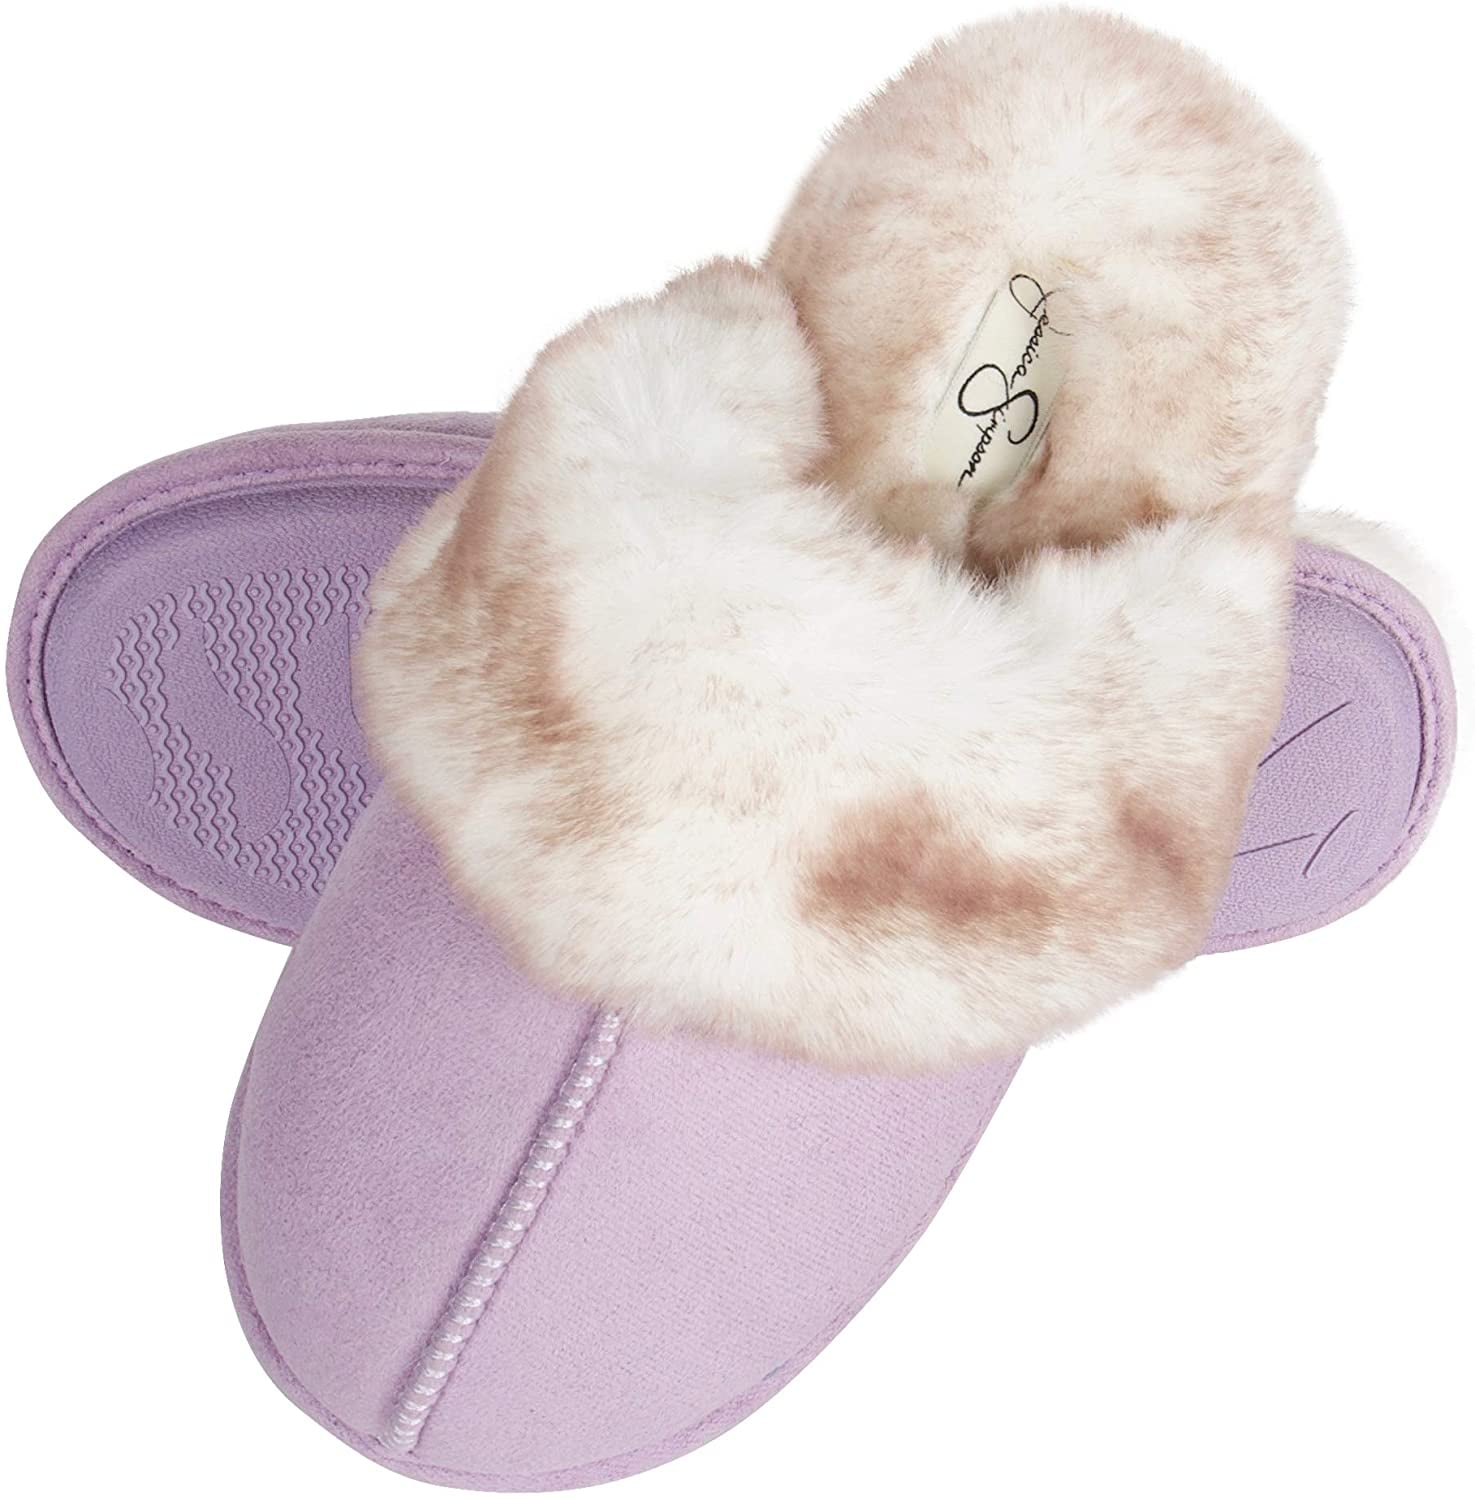 Jessica Simpson Girls Plush Faux Fur Slip on House Slippers With Memory Foam 